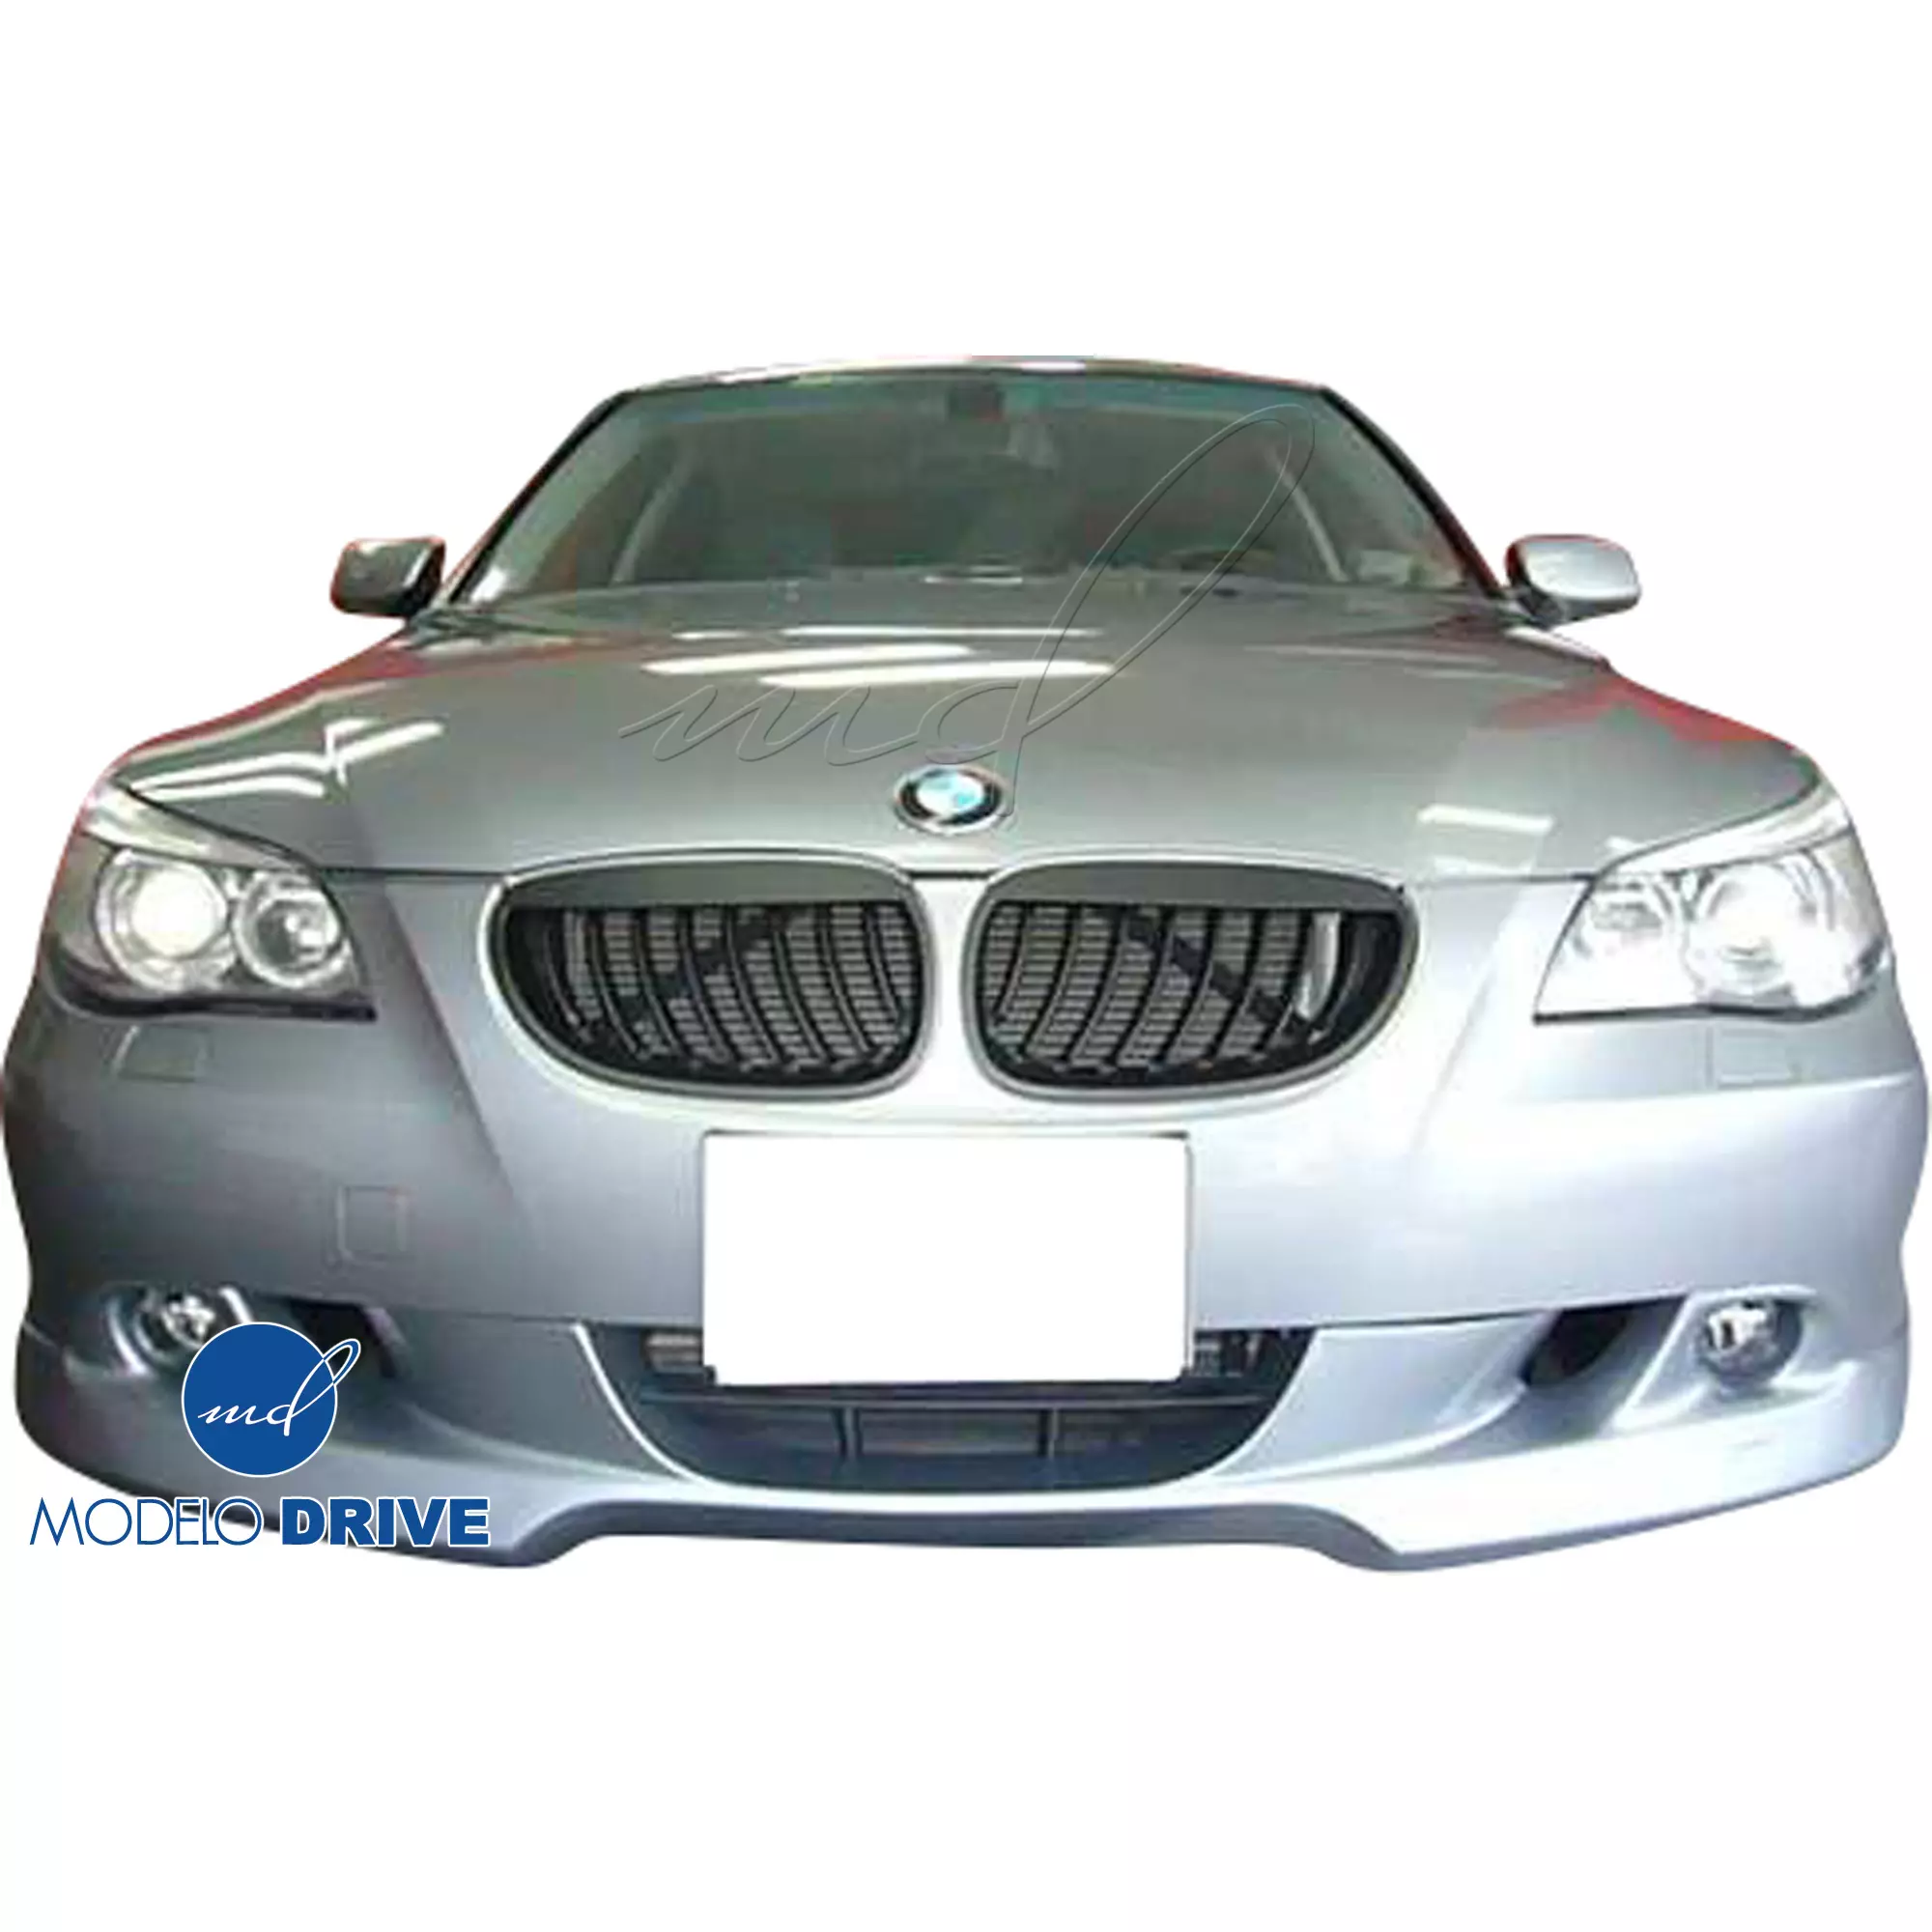 ModeloDrive FRP ASCH Front Valance Add-on > BMW 5-Series E60 2004-2010 > 4dr - Image 6